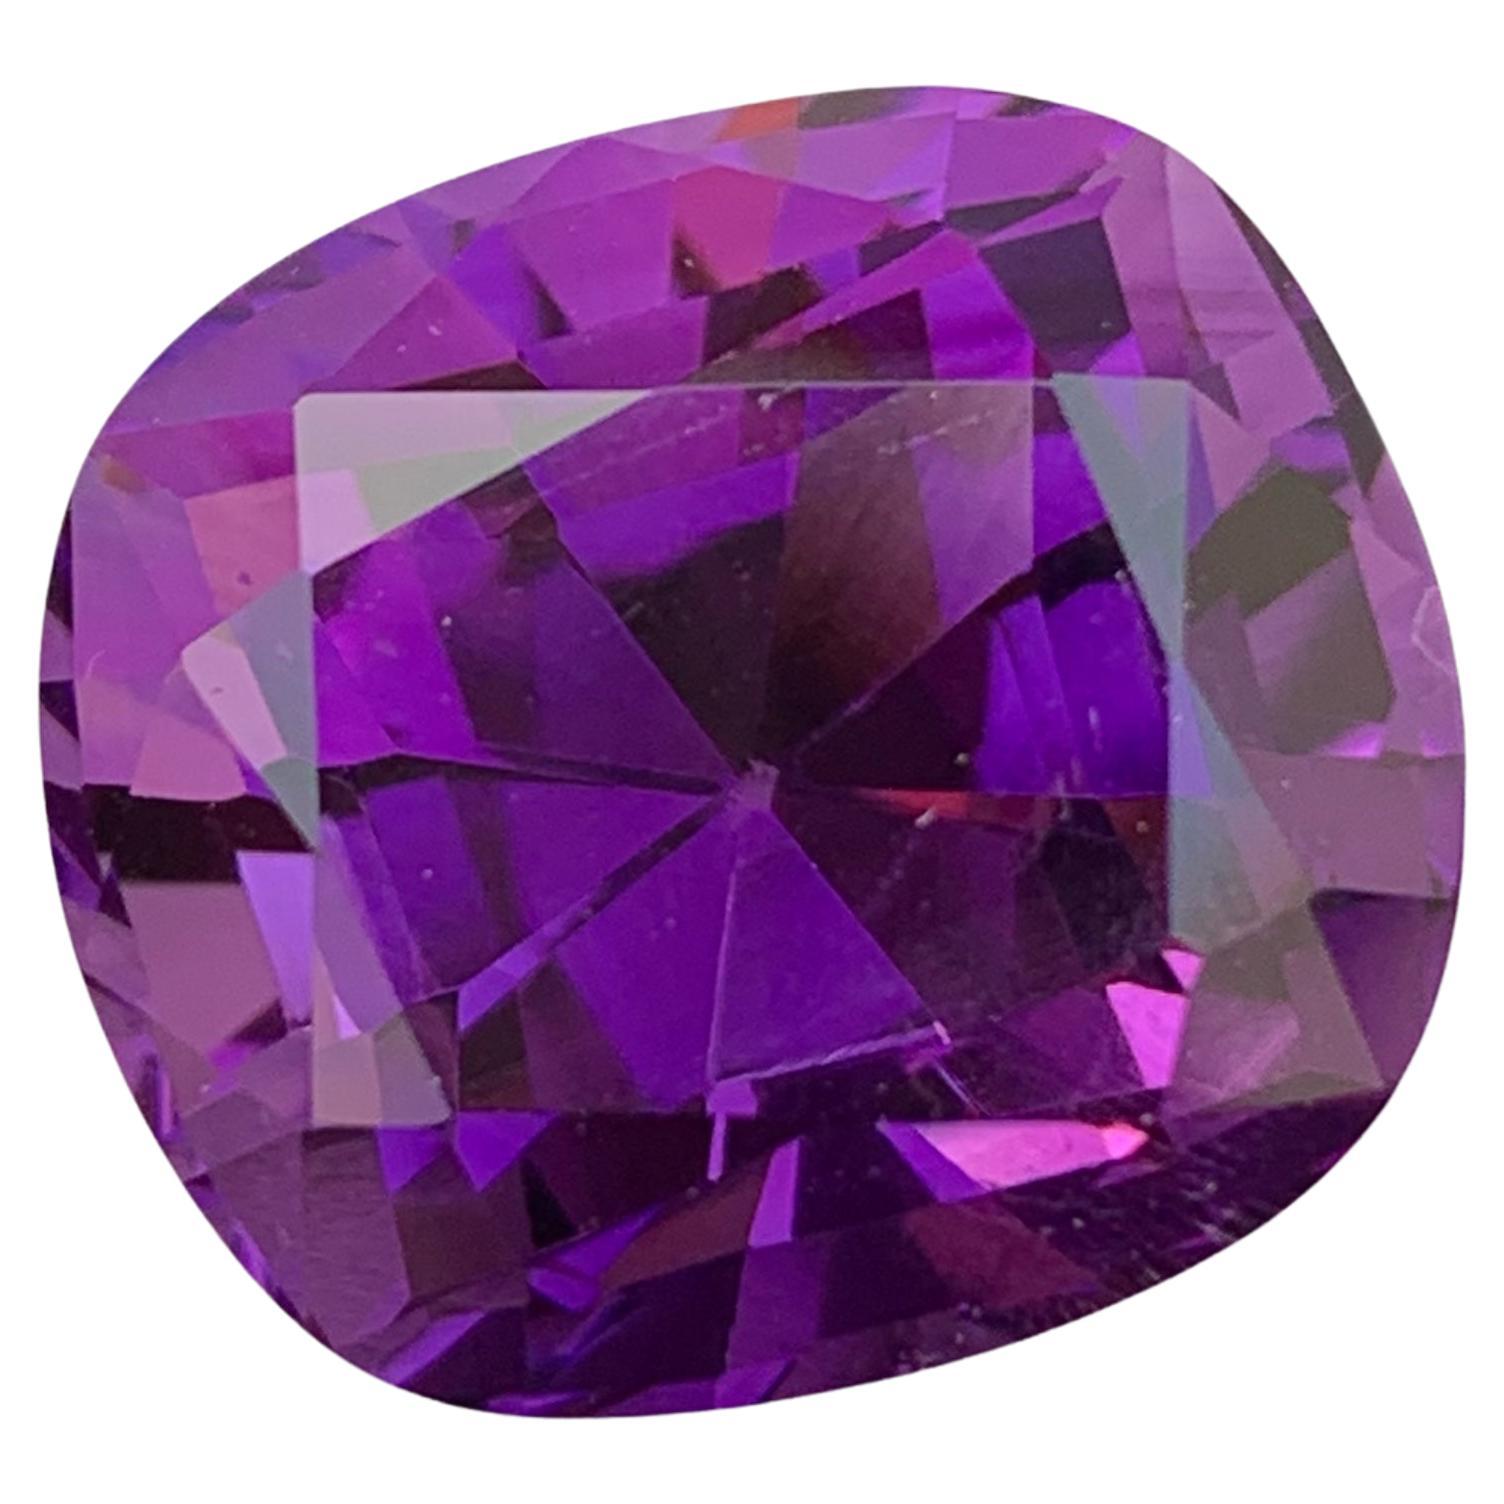 Exquisite Natural Loose Amethyst Stone 23.45 Carats Amethyst Jewelry